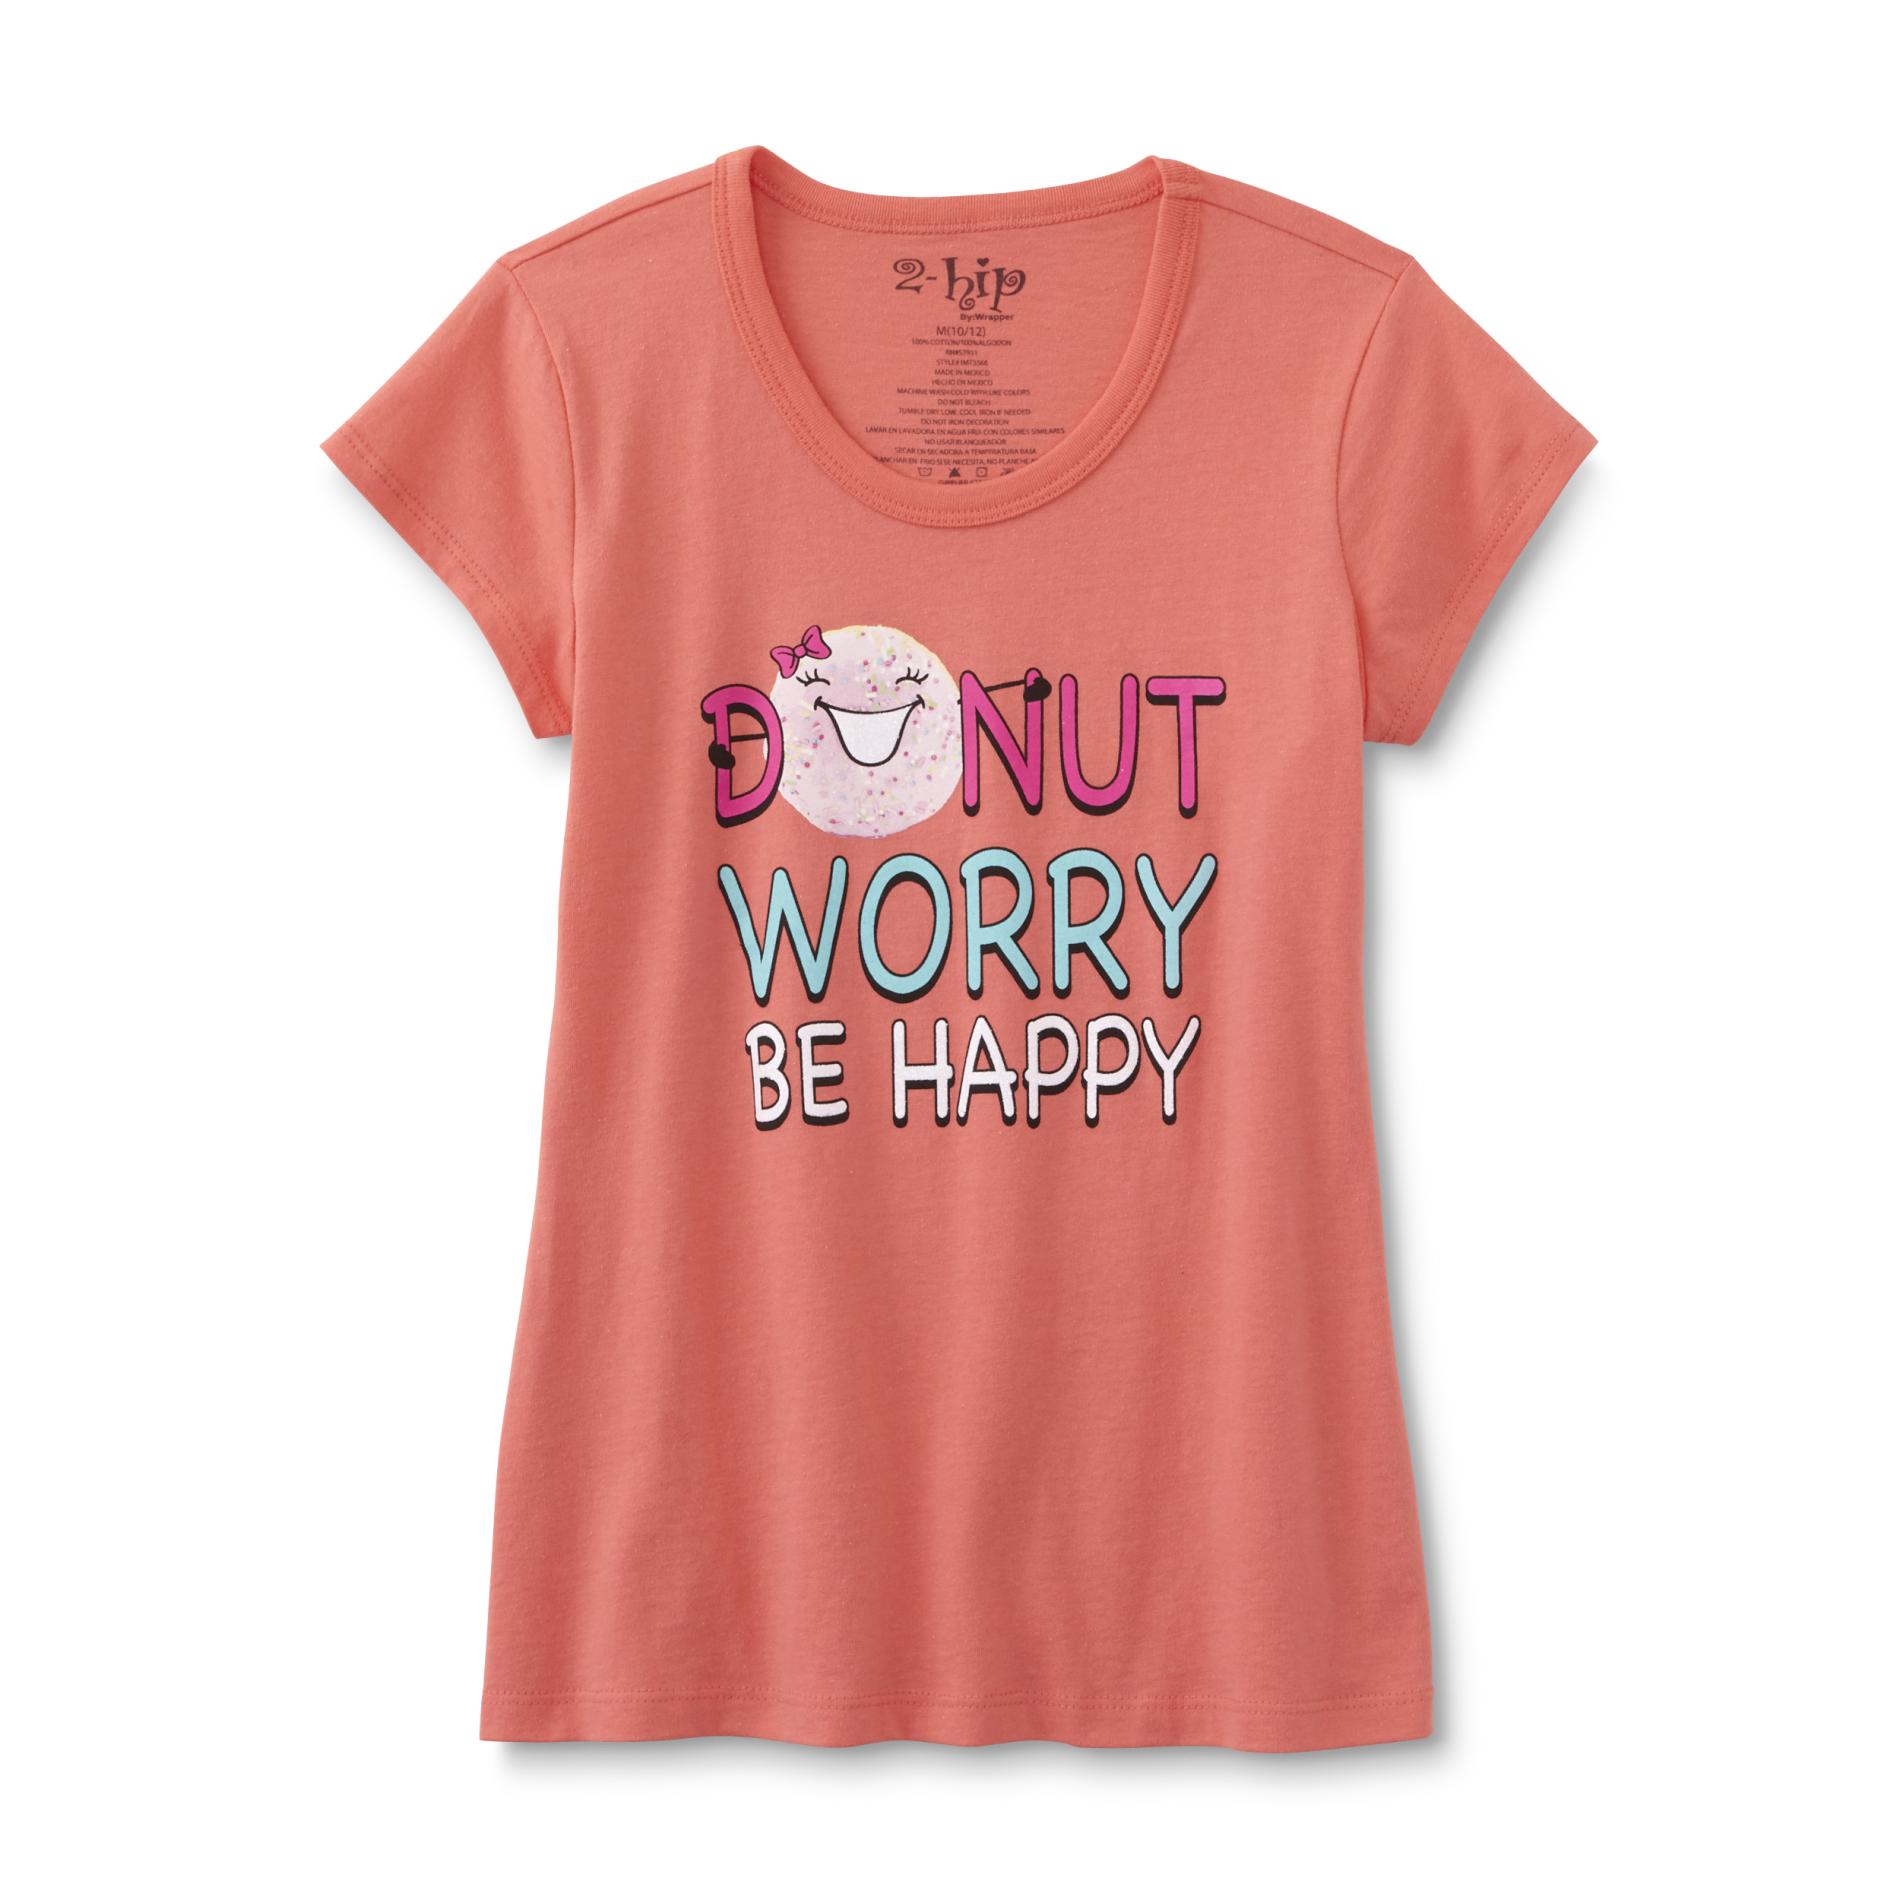 Wrapper Girl's Graphic T-Shirt - Donuts